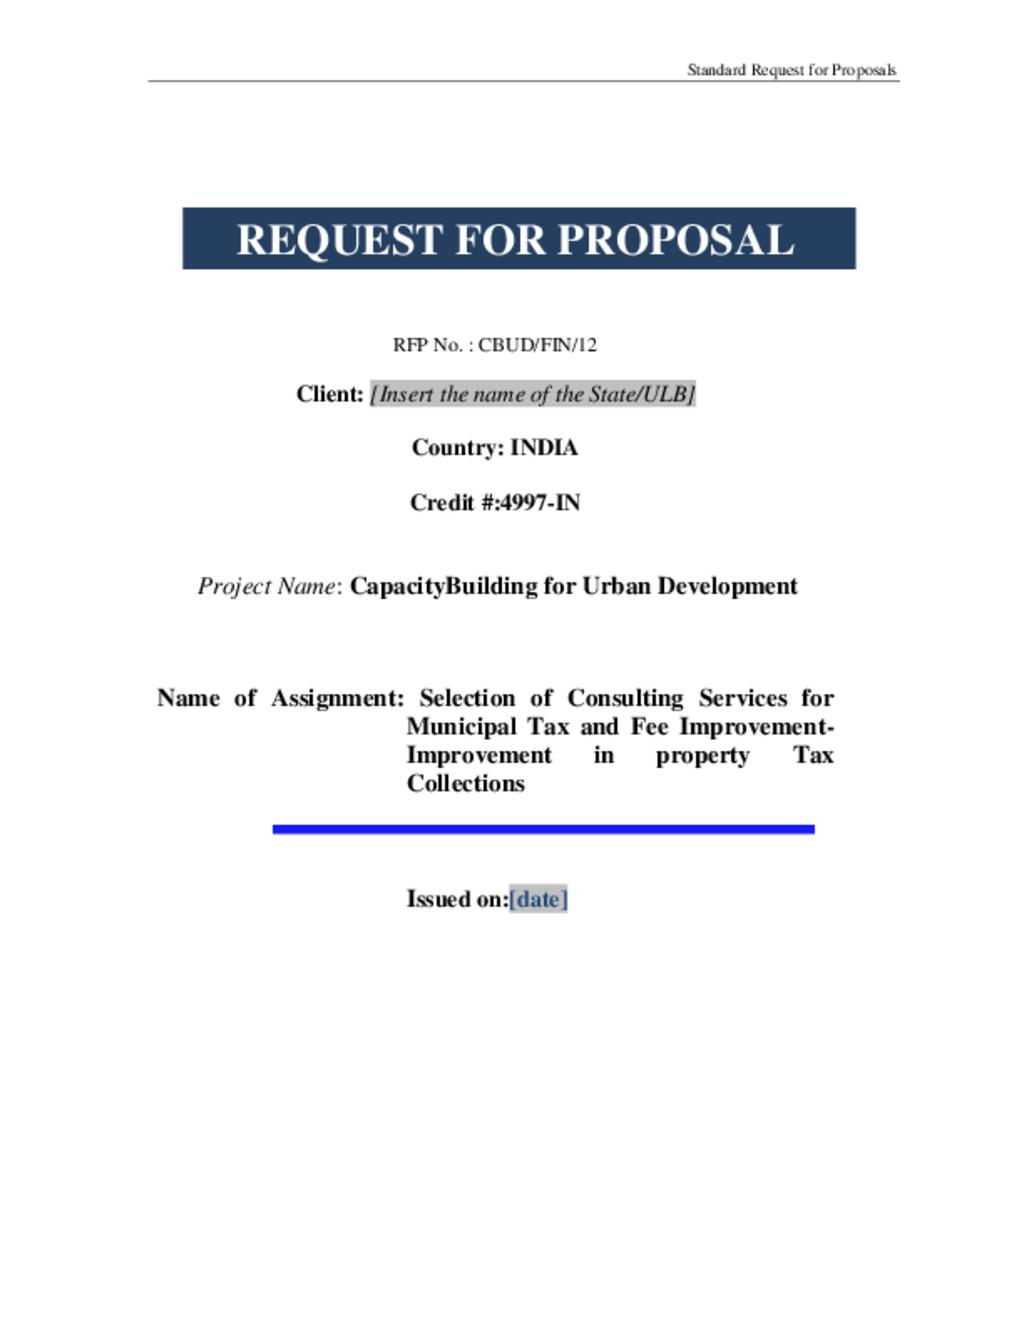 Model RFP for Selecting Consulting Services for Improvement in Property Tax Collections